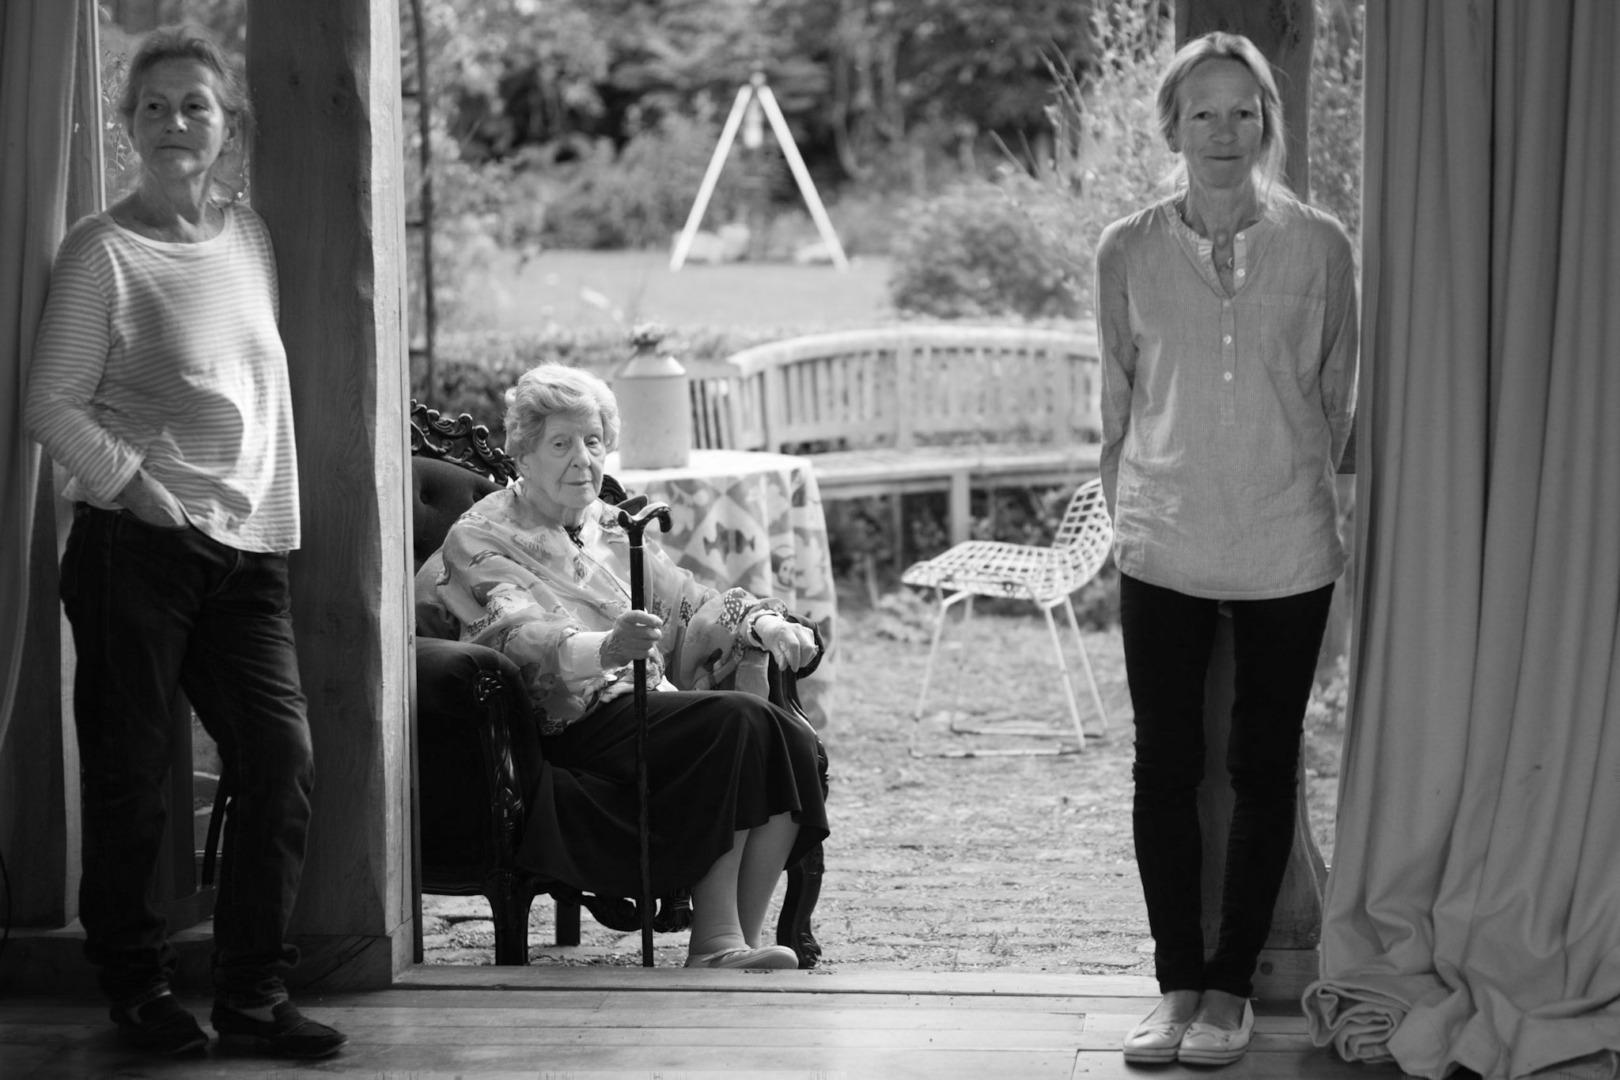 Mary Marjery and Emma  (Coltsfoot Barn July 2016)
Leica M10 with 75 APO M 1/60 ISO 640 f2